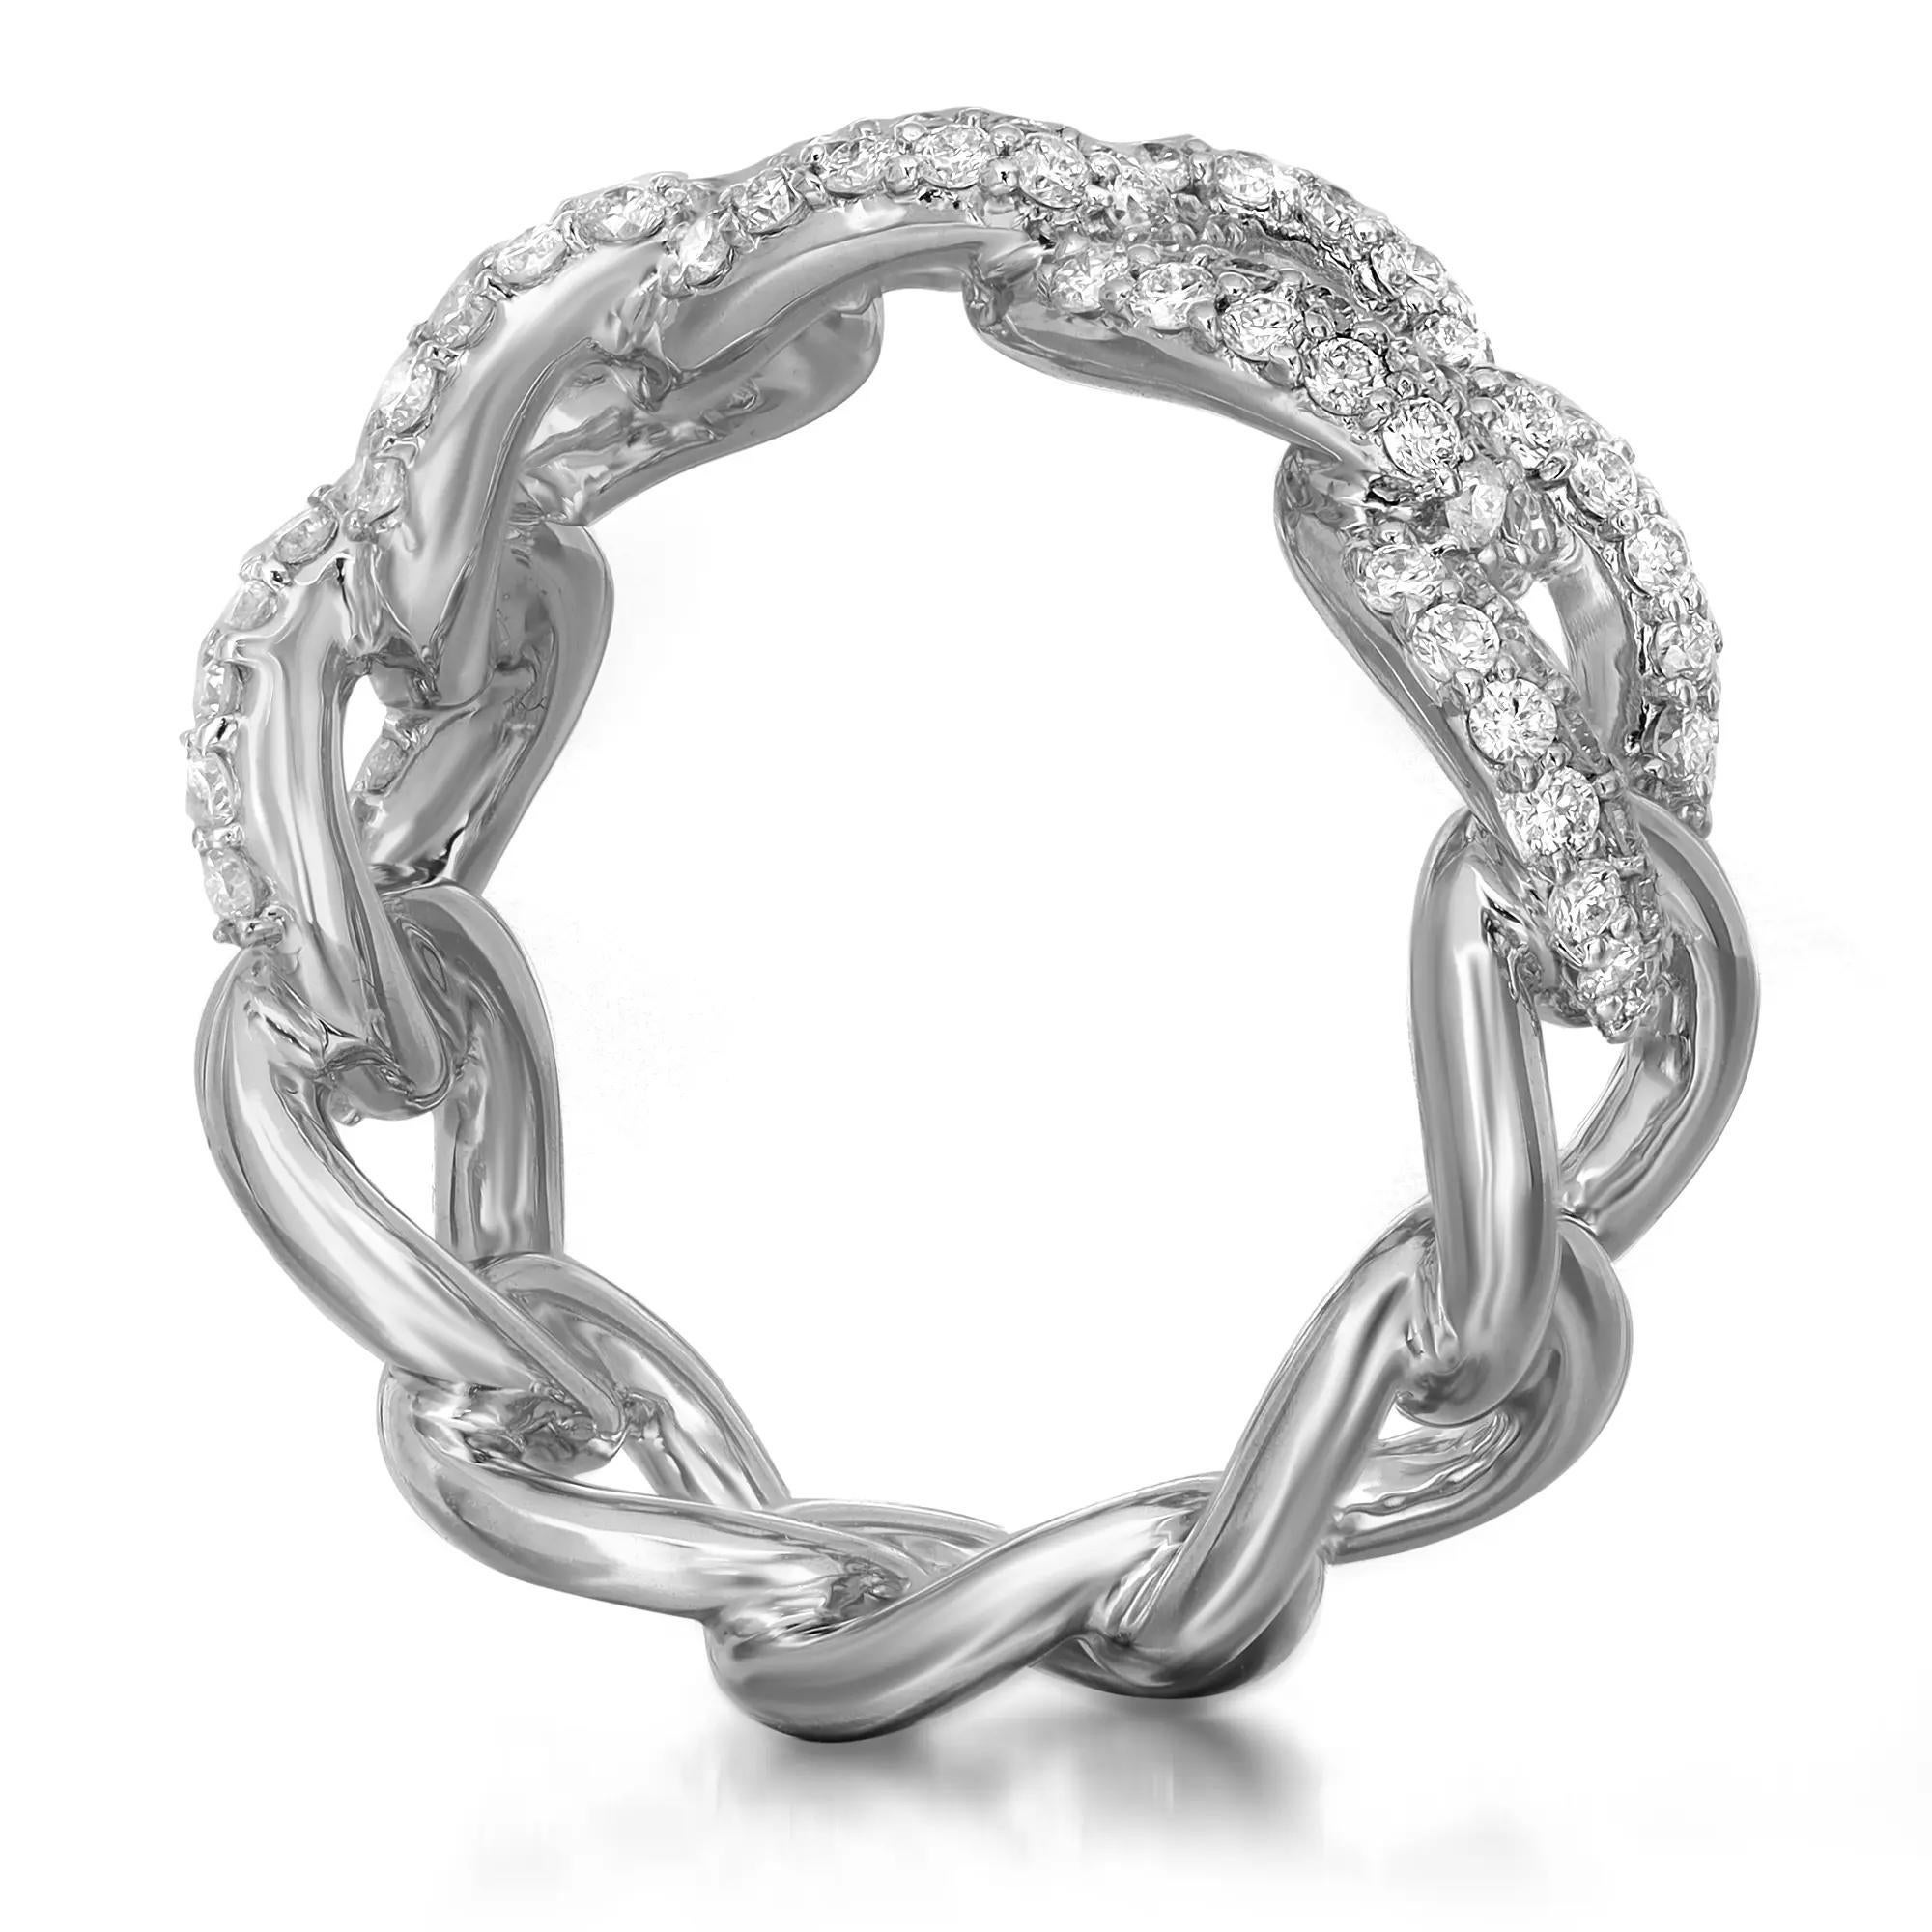 This classic yet elegant chain link ring band features pave set round brilliant cut diamonds encrusted halfway through the ring. Crafted in high polished 18k white gold. Total diamond weight: 0.95 carat. Diamond quality: Color G-H and Clarity VS-SI.